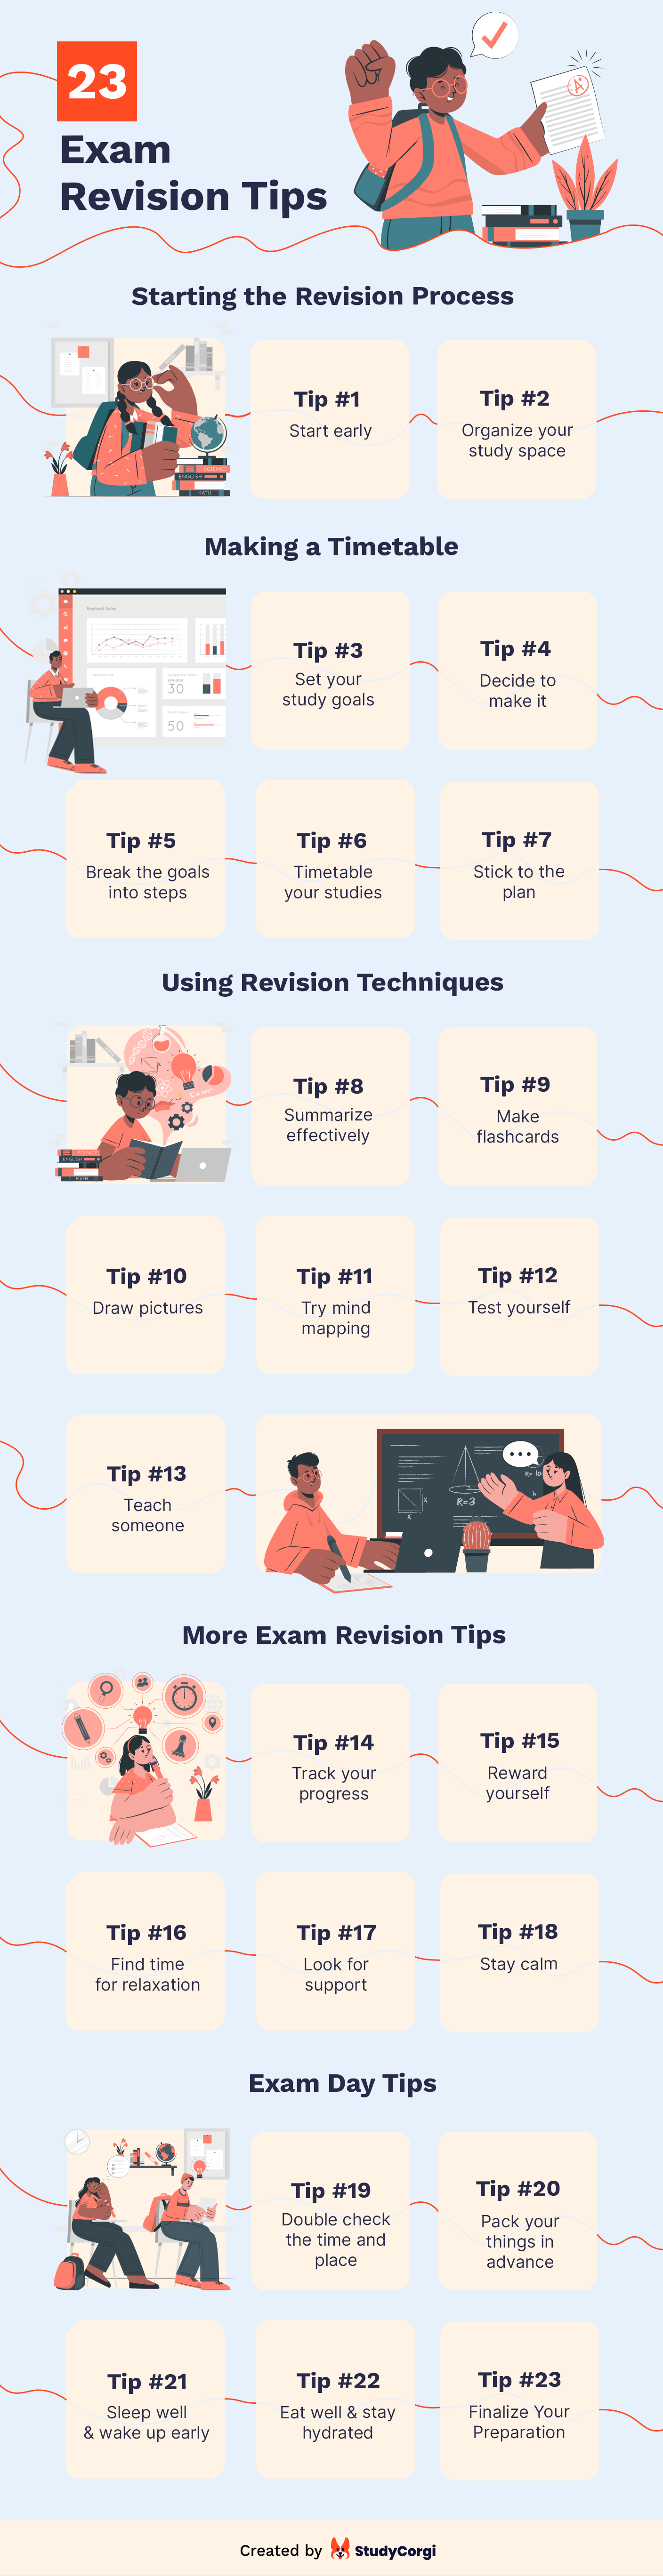 The infographic unites 23 exam revision tips described in the article.